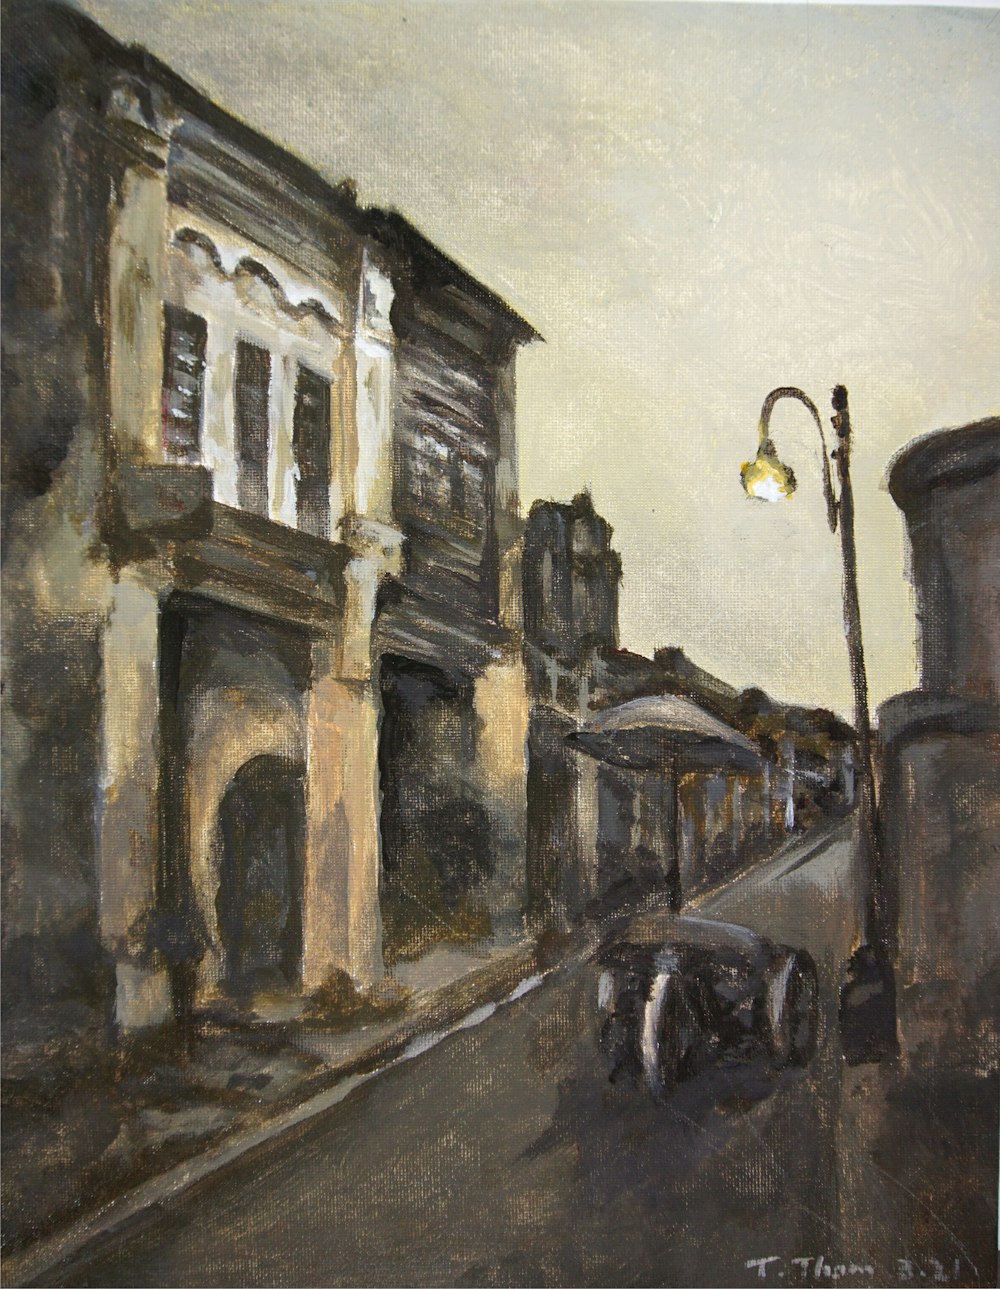 a painting of a street scene with a horse and buggy